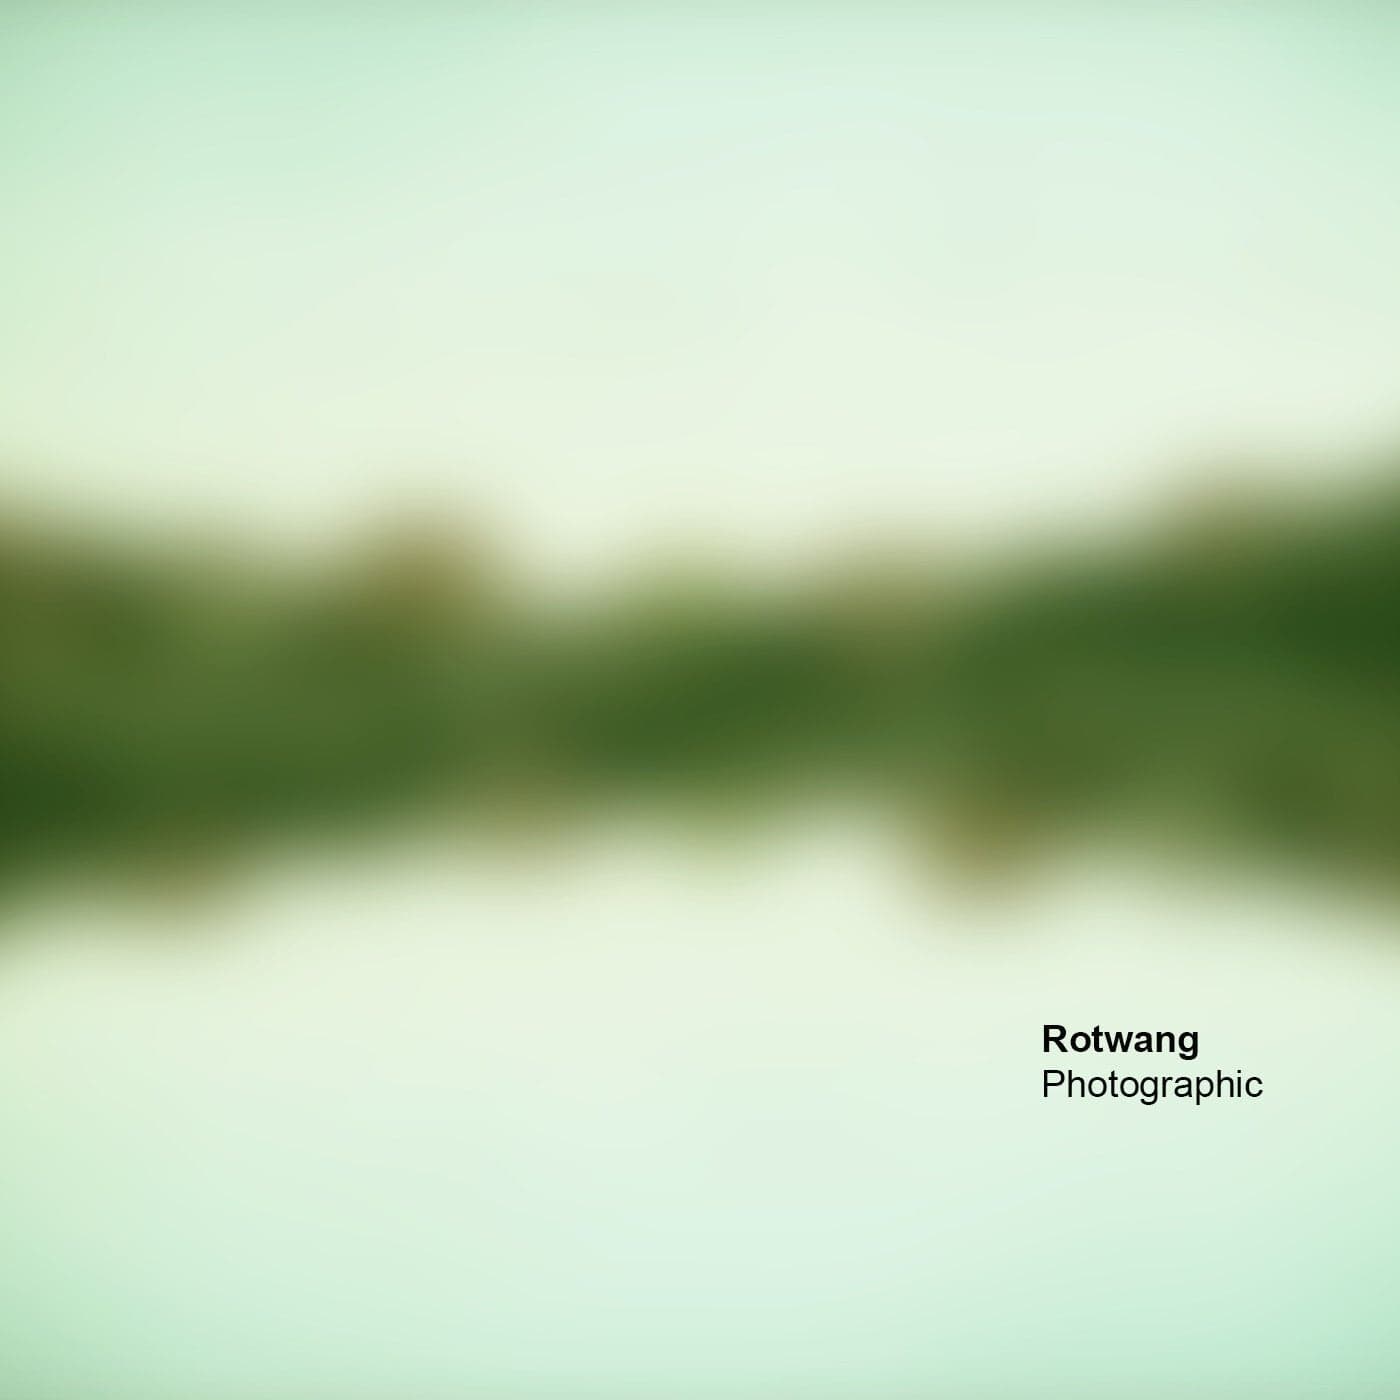 Download Rotwang - Photographic on Electrobuzz